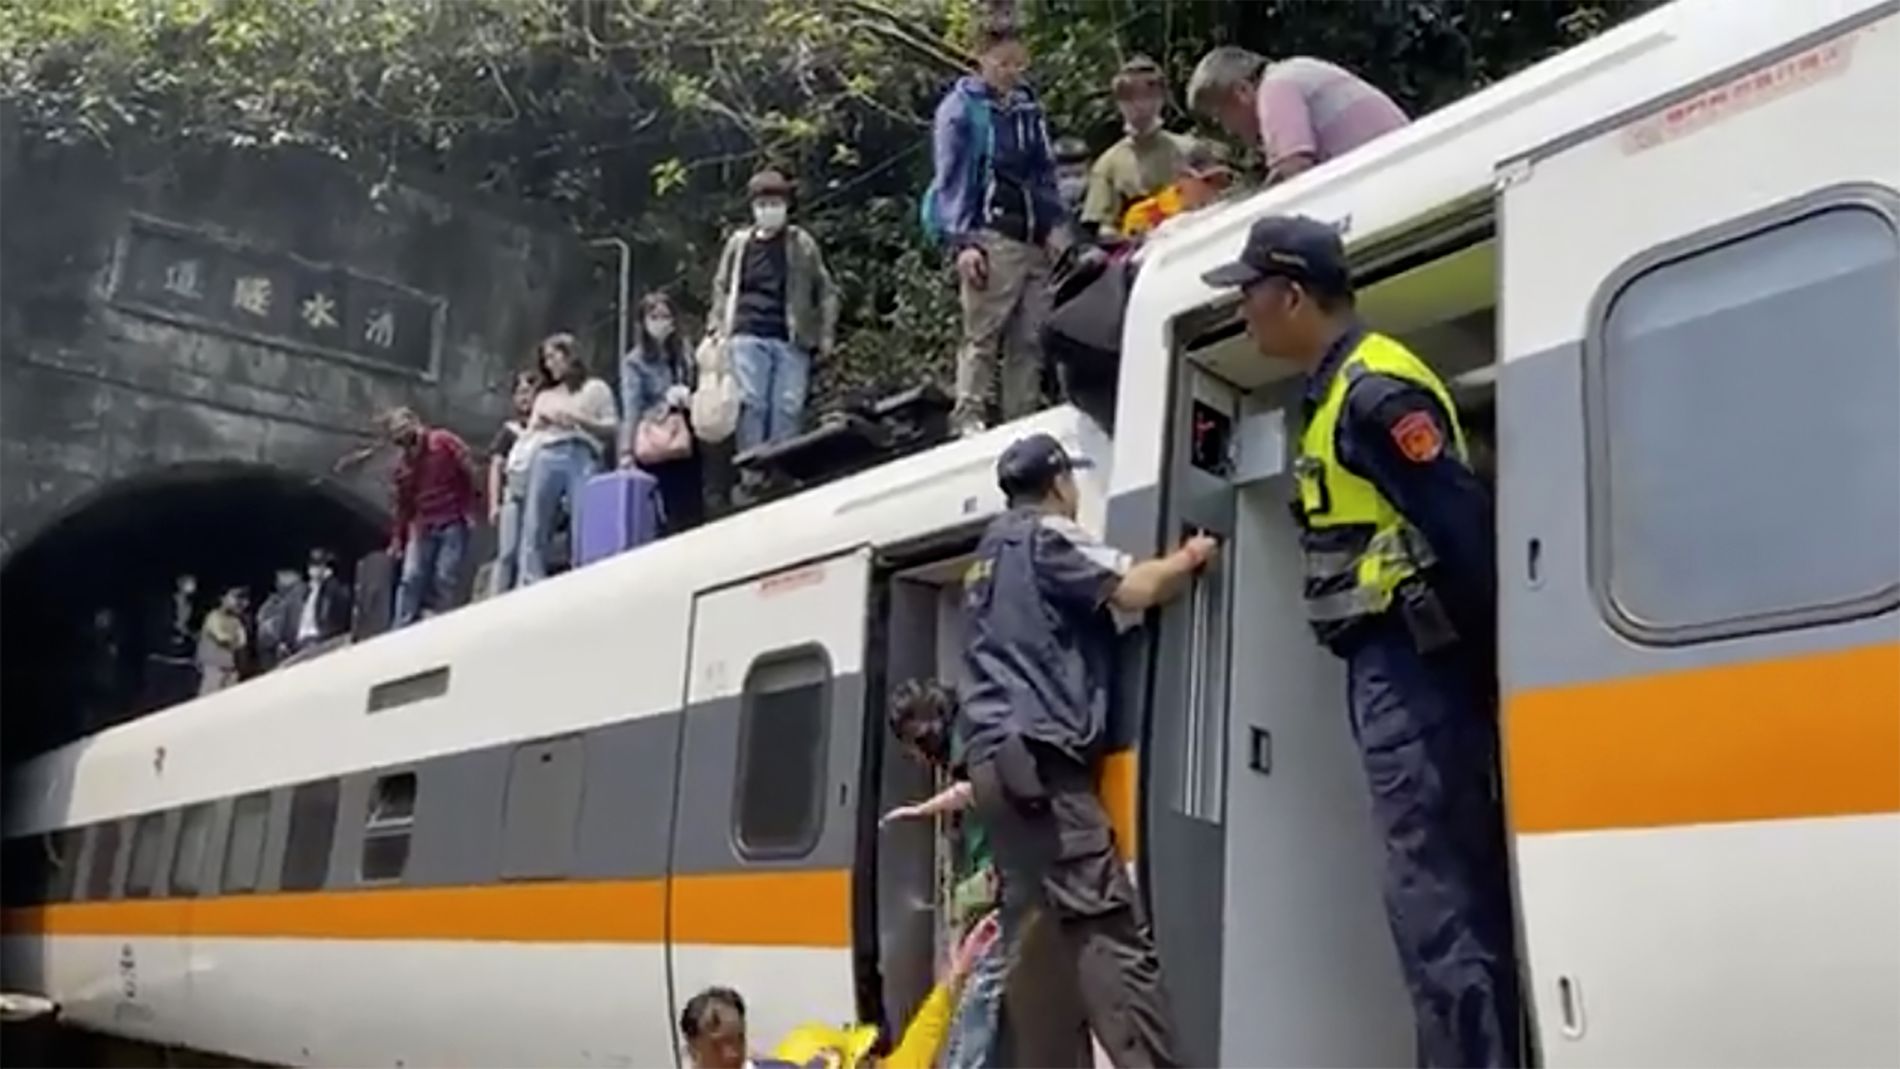 36 died in a train accident in Taiwan: